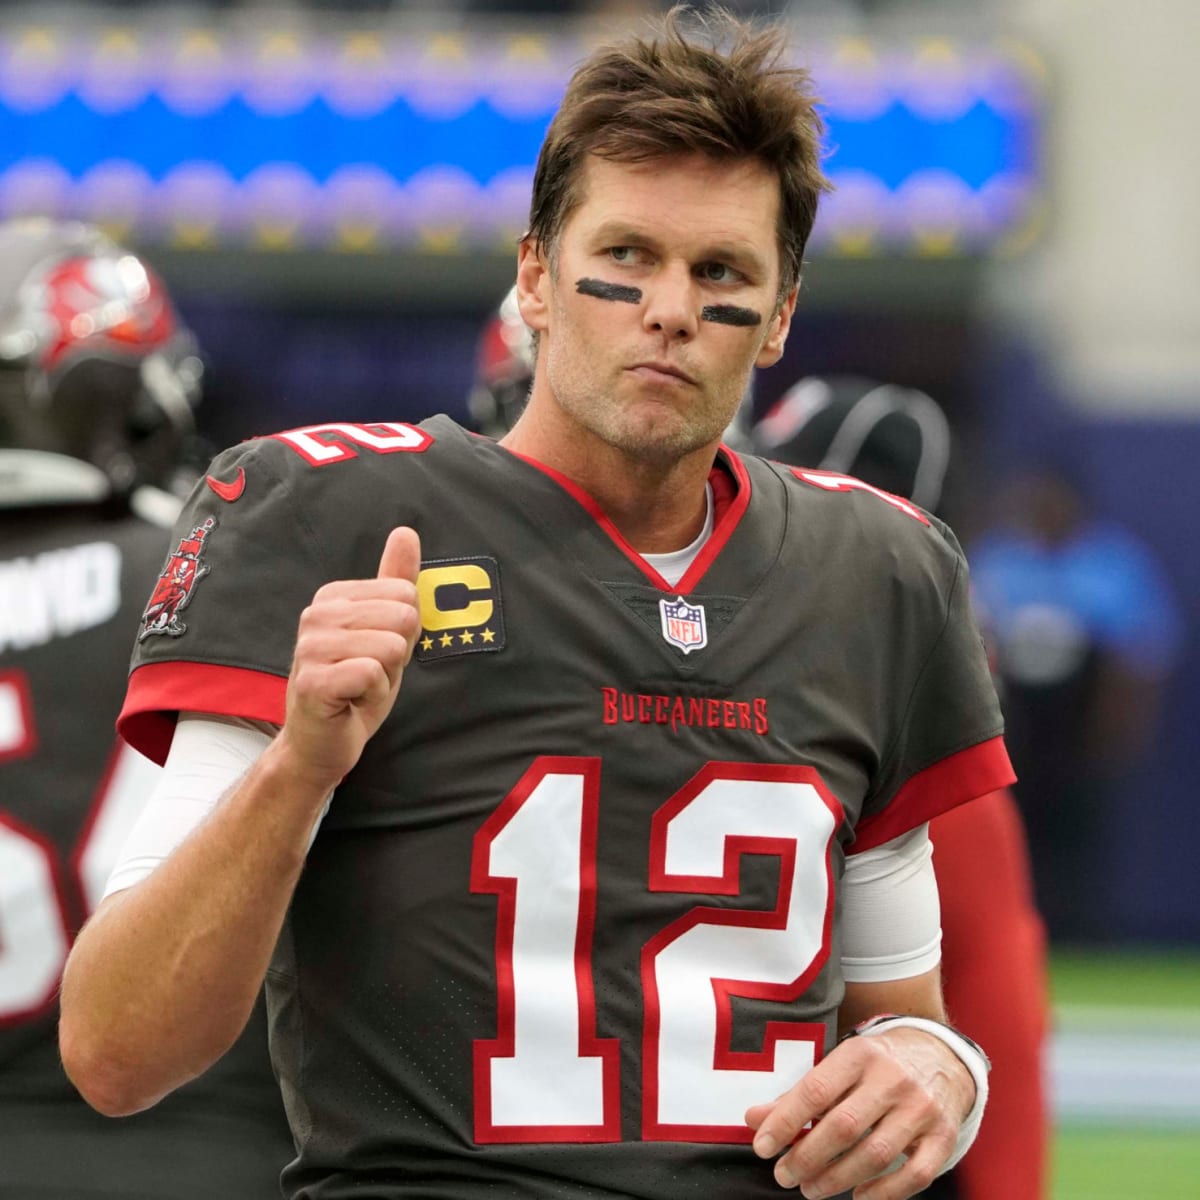 Look: All-Time NFL Quarterback Tier List Ranking Goes Viral - The